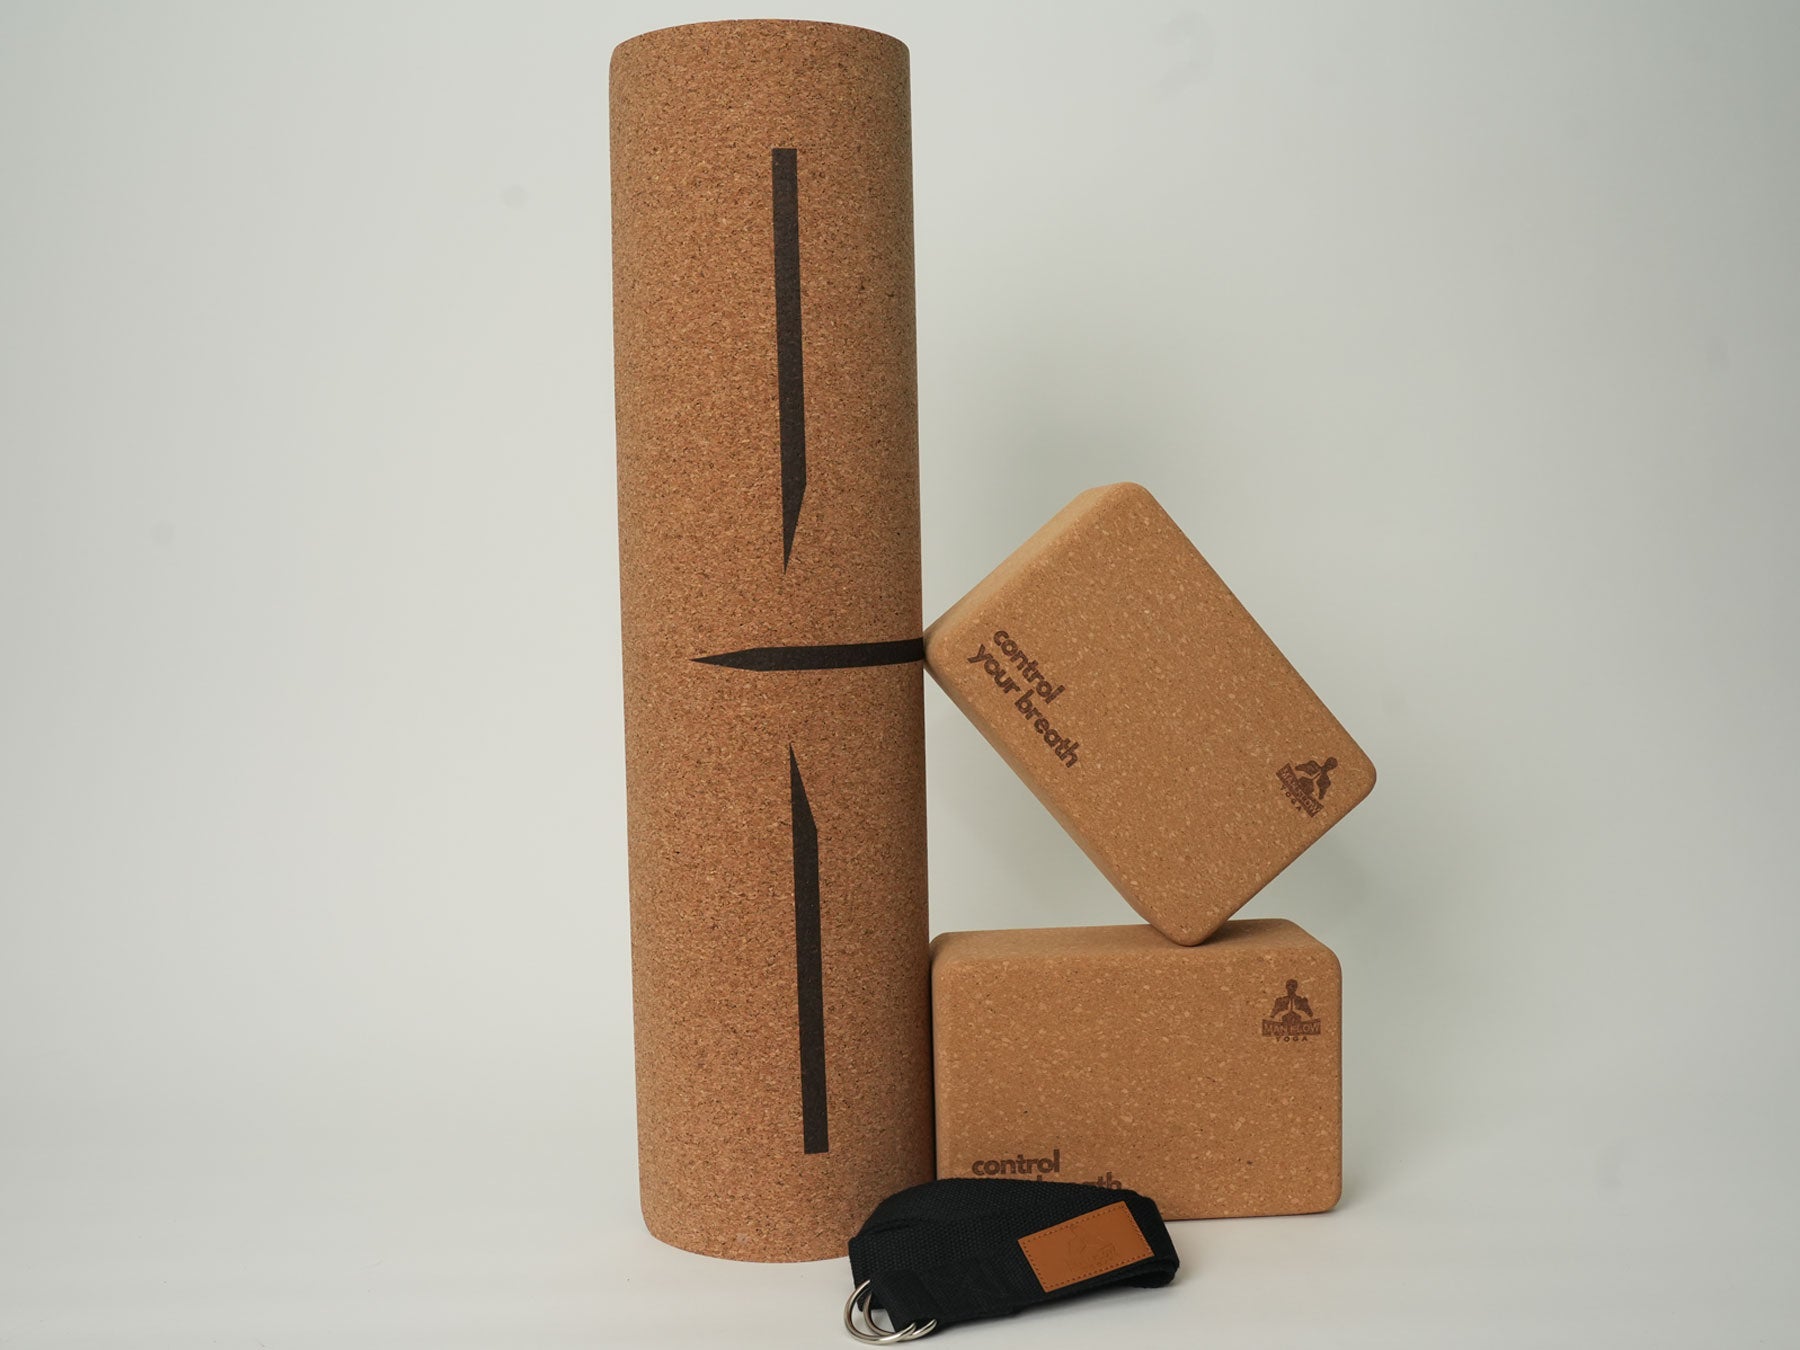 Are Cork Yoga Mats Worth It? [Pros & Cons]